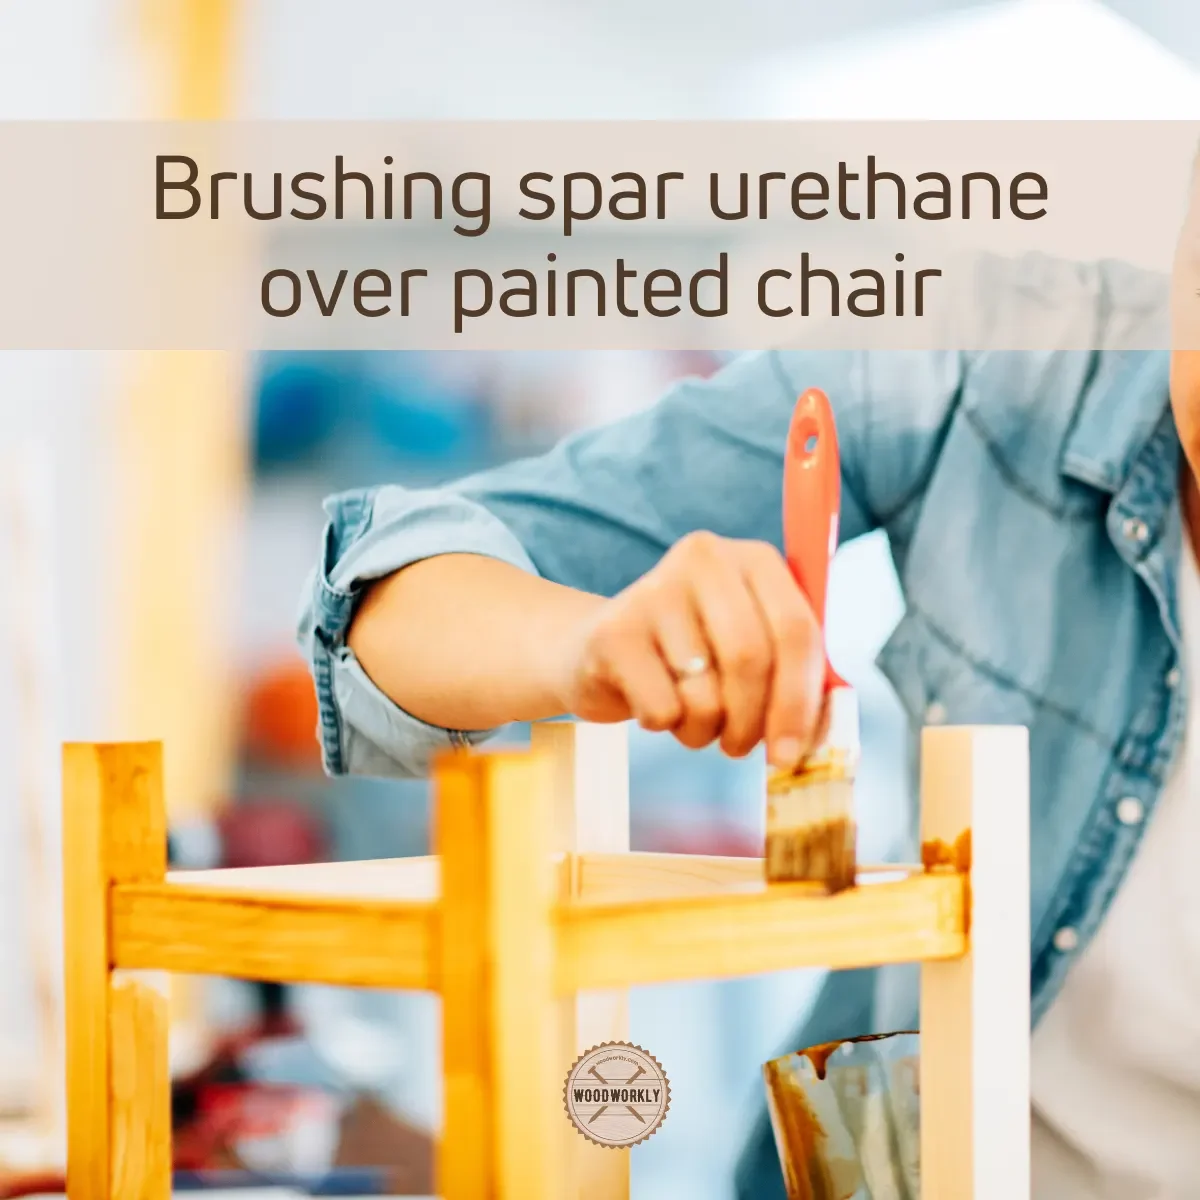 Brushing spar urethane over painted chair